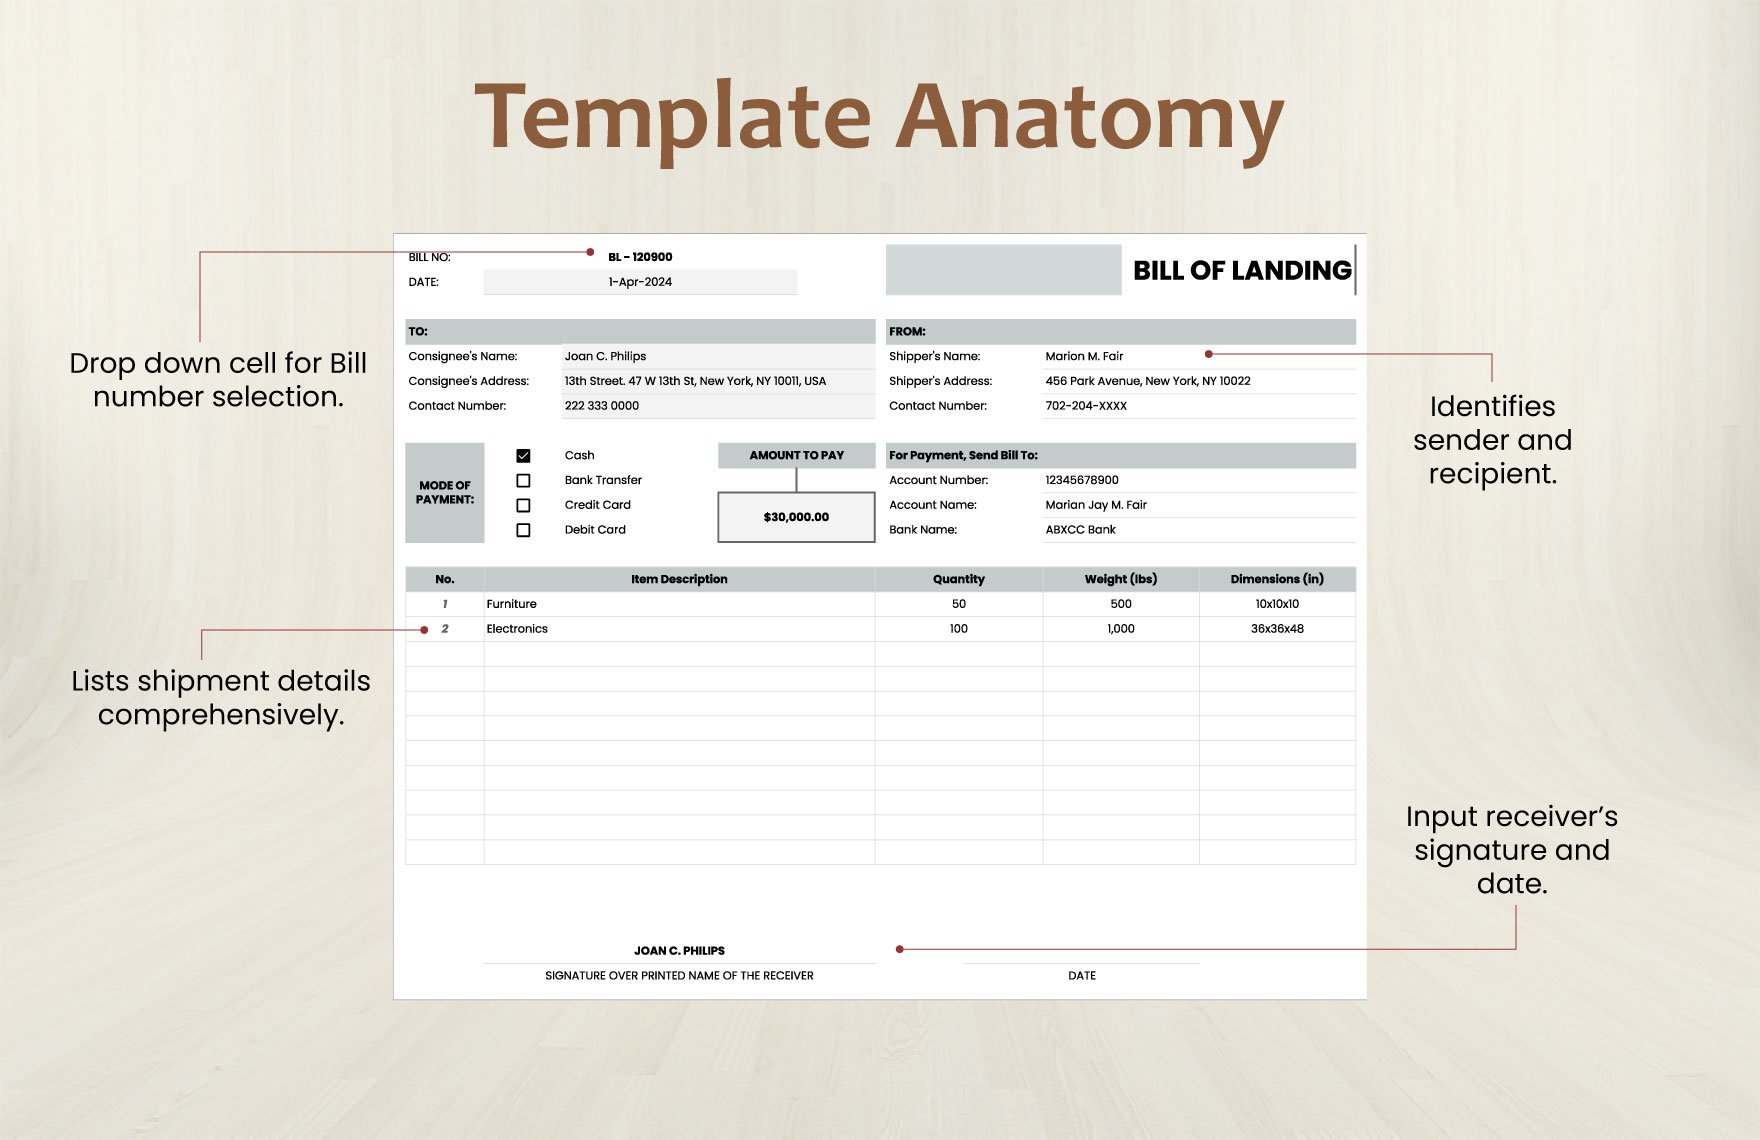 Fillable Bill of Lading Template